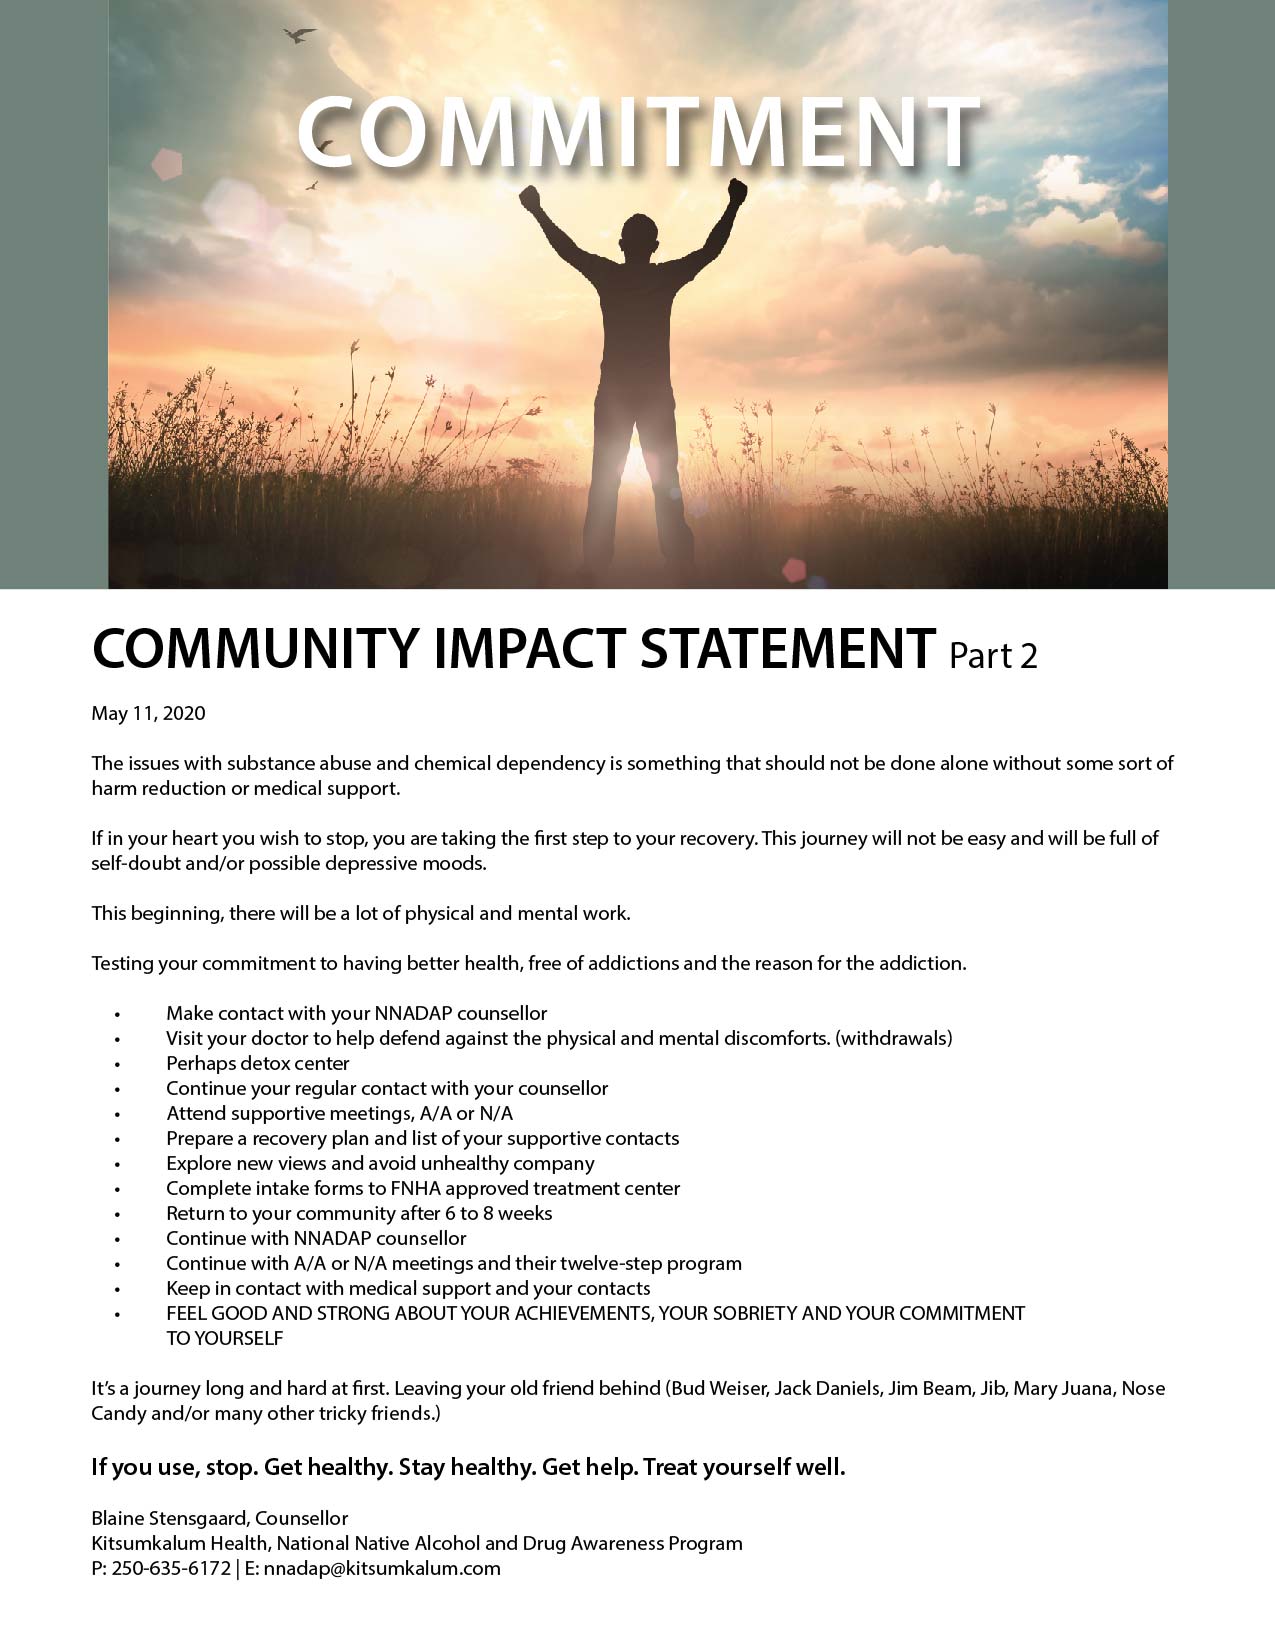 Community Impact Statement Part 2 – Recovery and Commitment